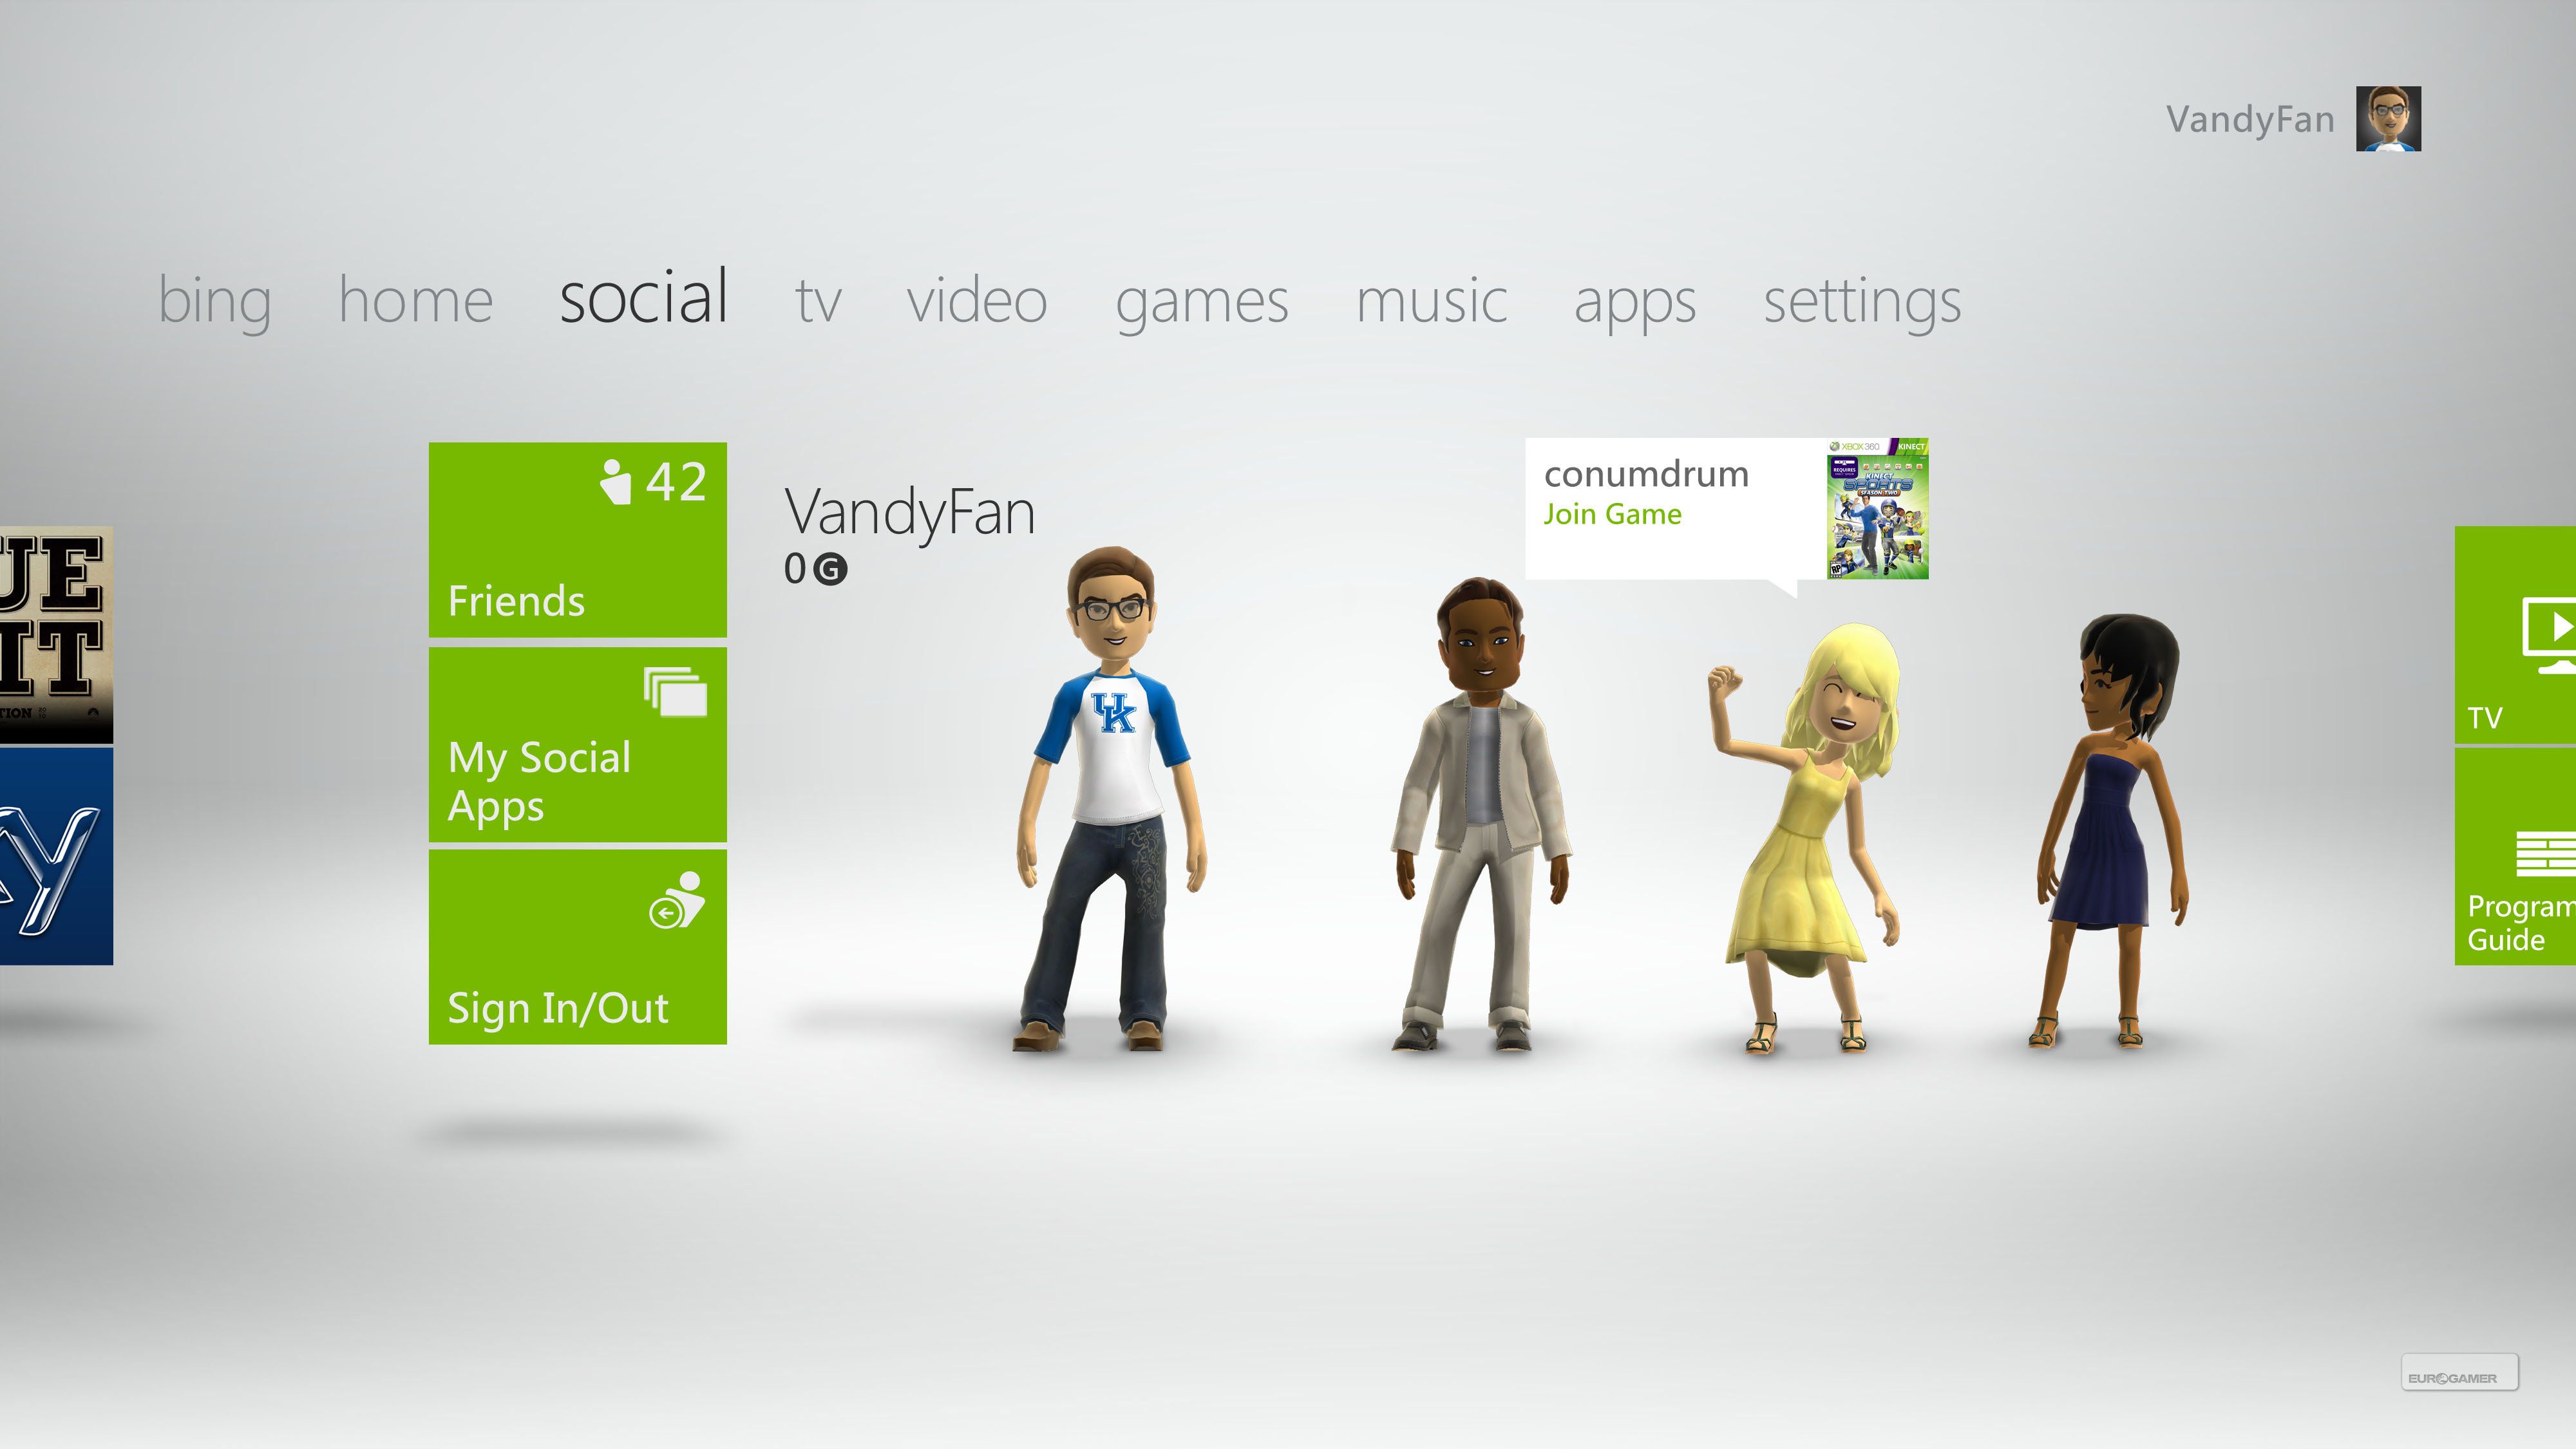 Xbox 360 wallpaper for XBMC | GBAtemp.net -> The Independent Video ...